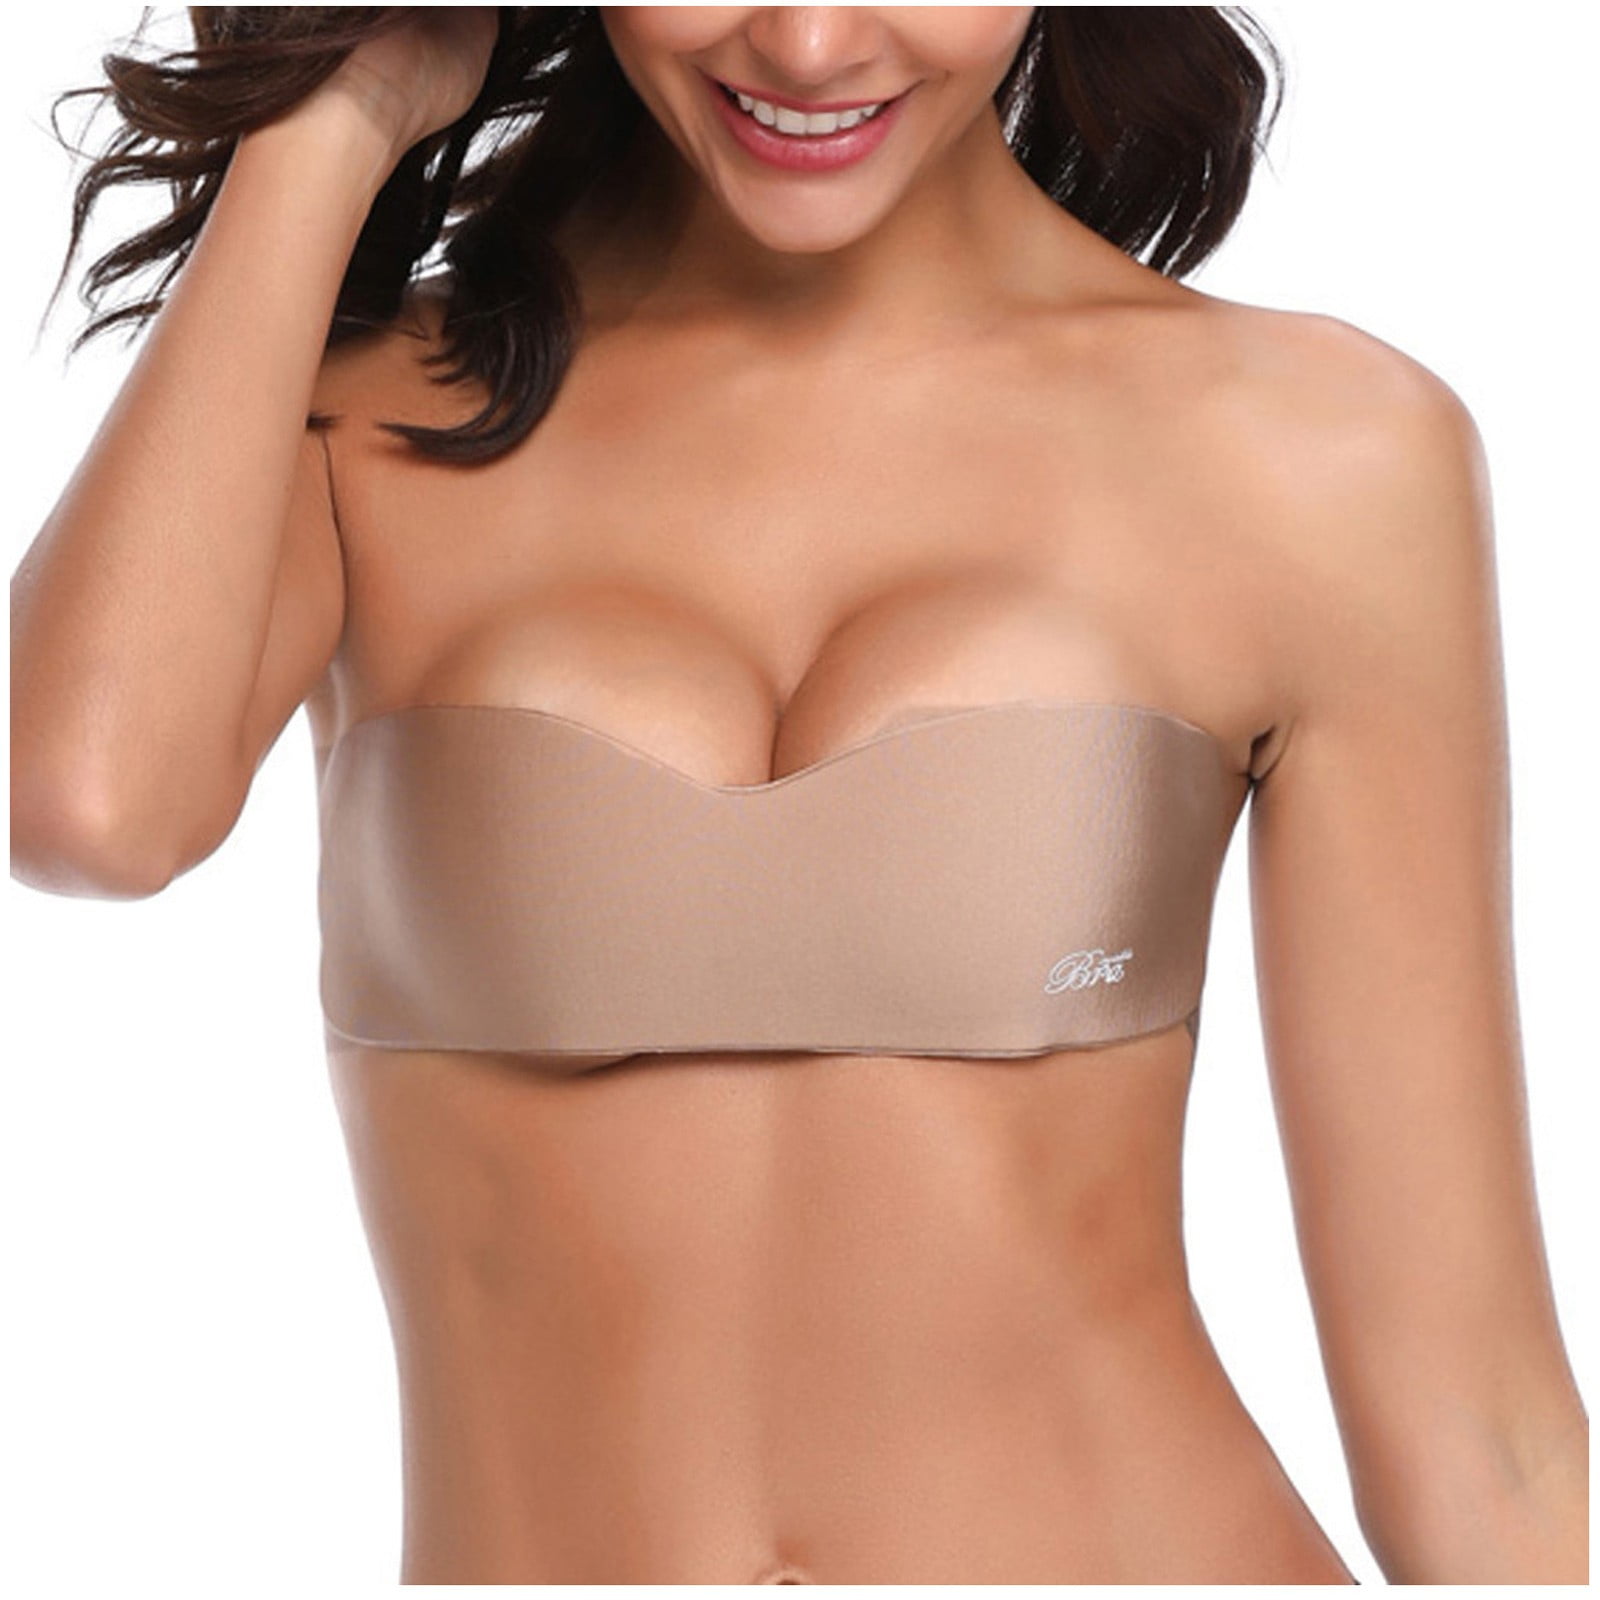 WOJER〗Strapless Invisible Push Up Bra Tape Silicone Pull-up Bra